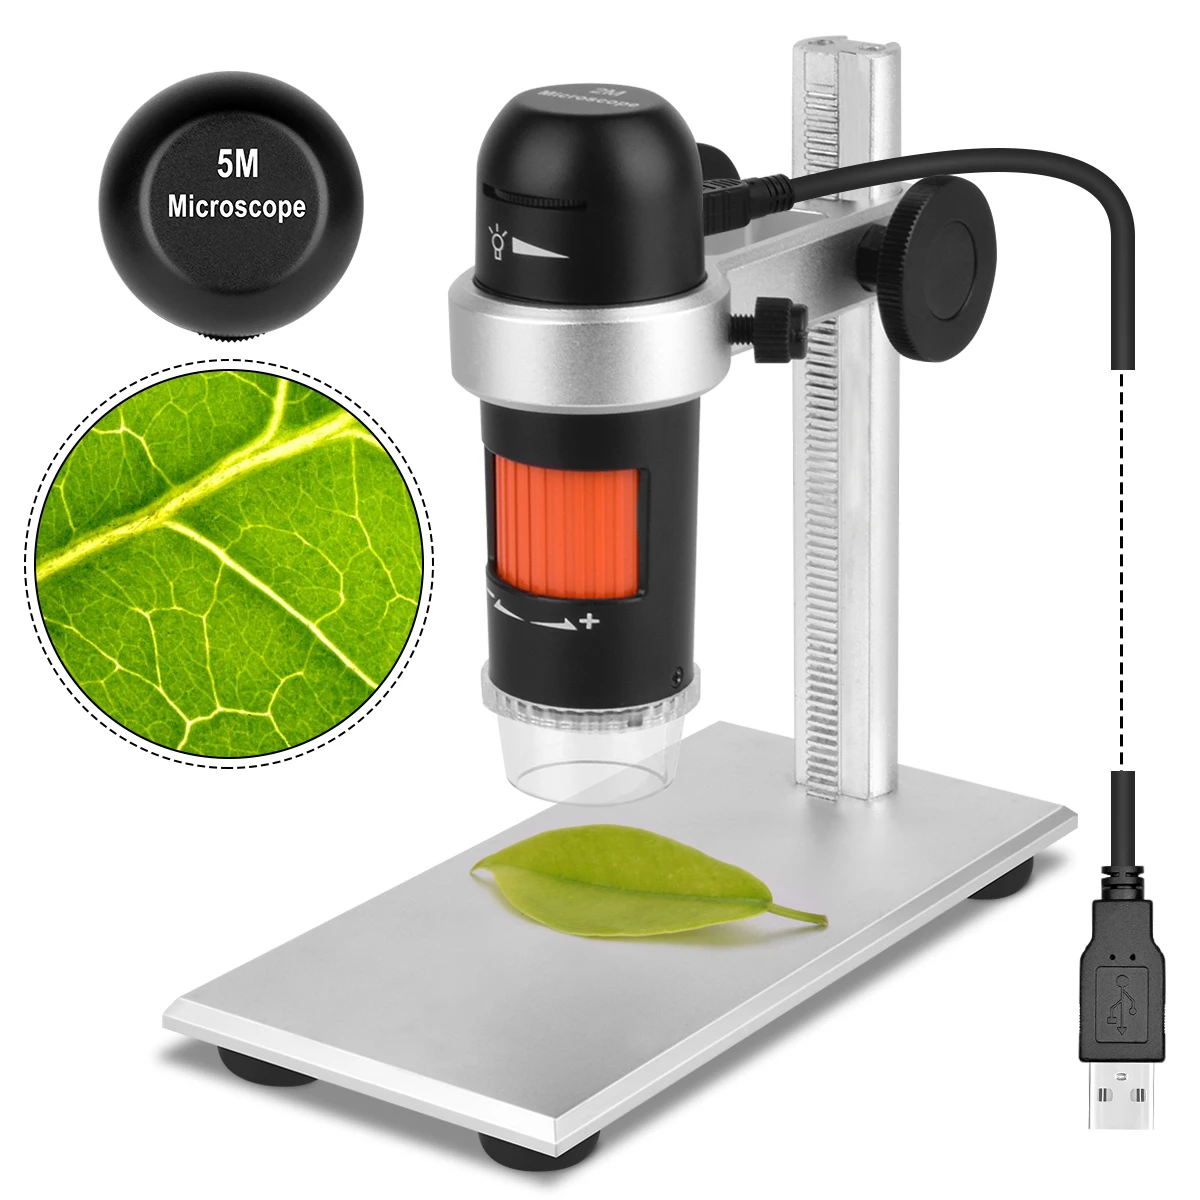 Wholesale Digital Microscope Driver 200x With Measuring Software m.alibaba.com